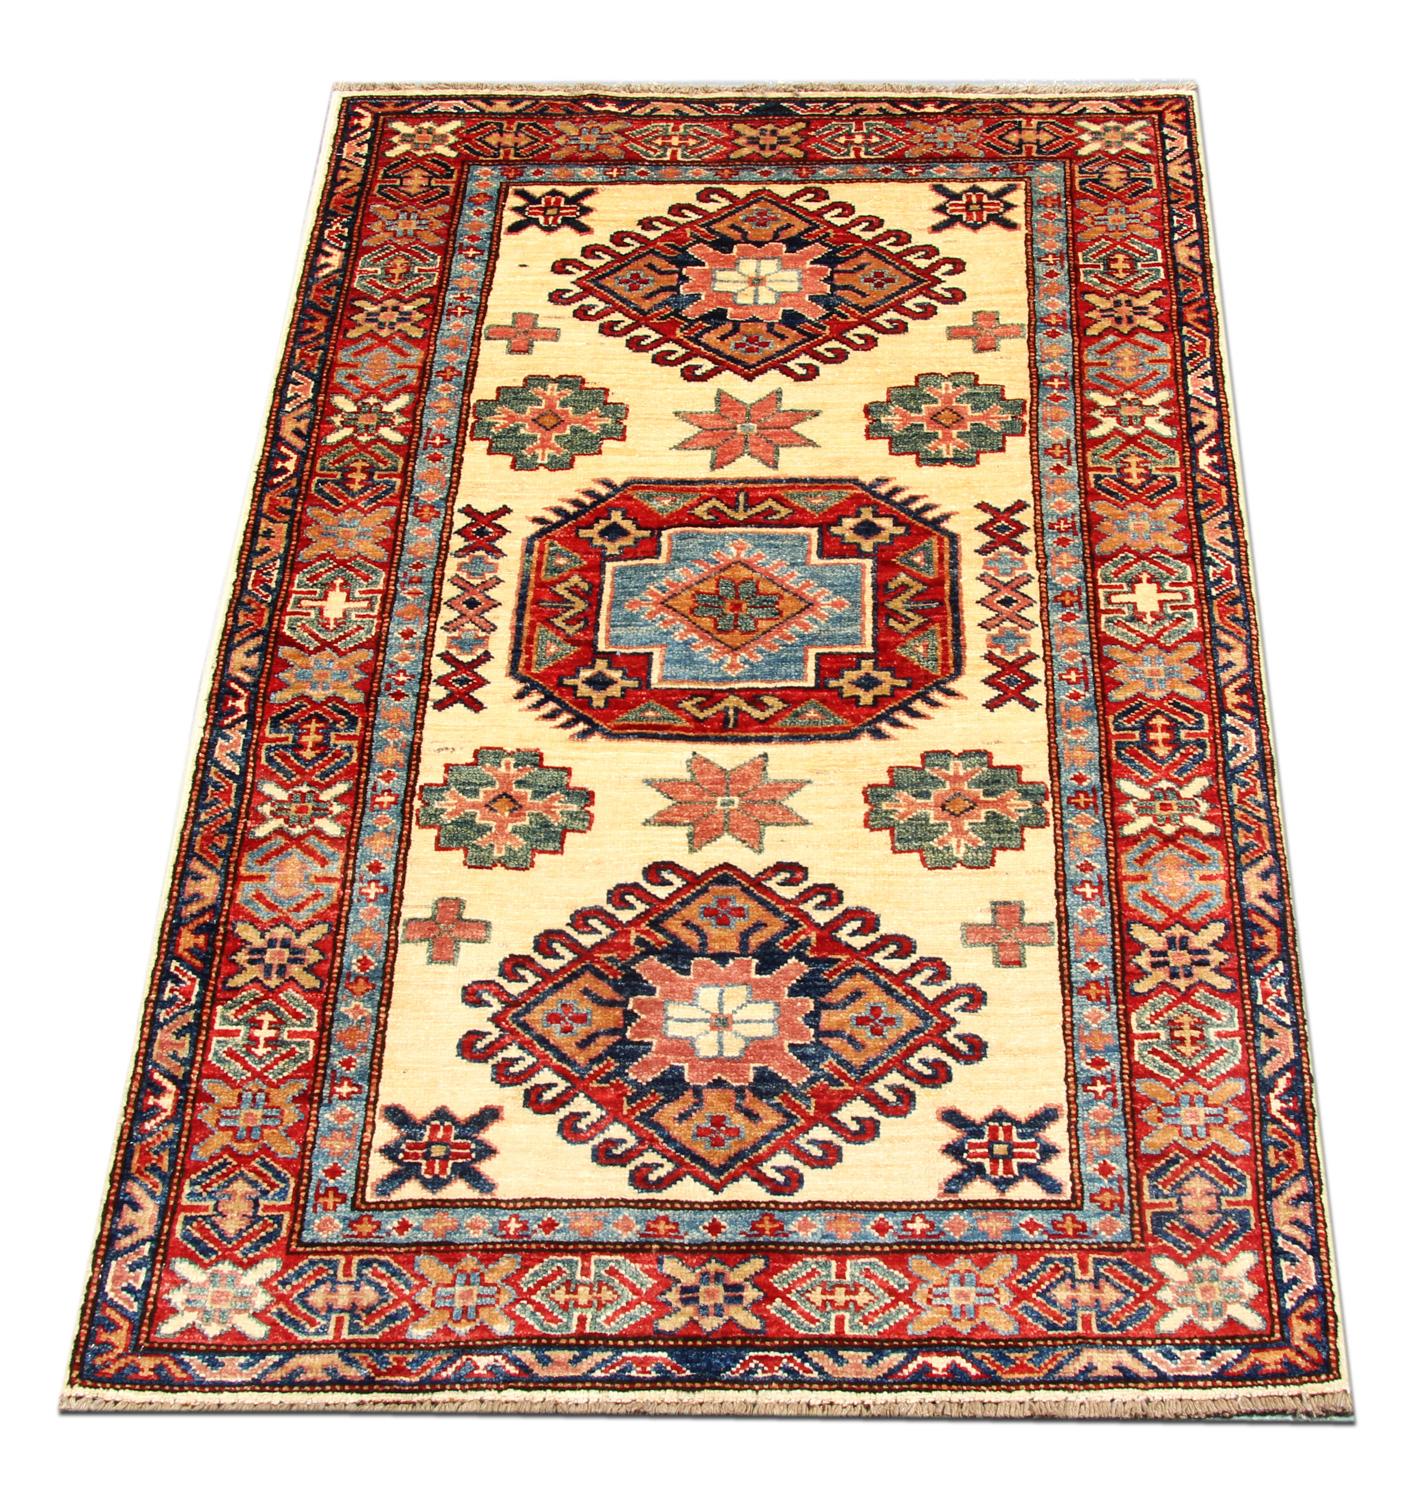 These new traditional handmade rugs feature designs from the Kazak region in Caucasia. A conventional tribal rug is famous in the part of Kazak Area. Afghan weavers have made this handwoven rug of quality handspun wool and cotton. This high-quality